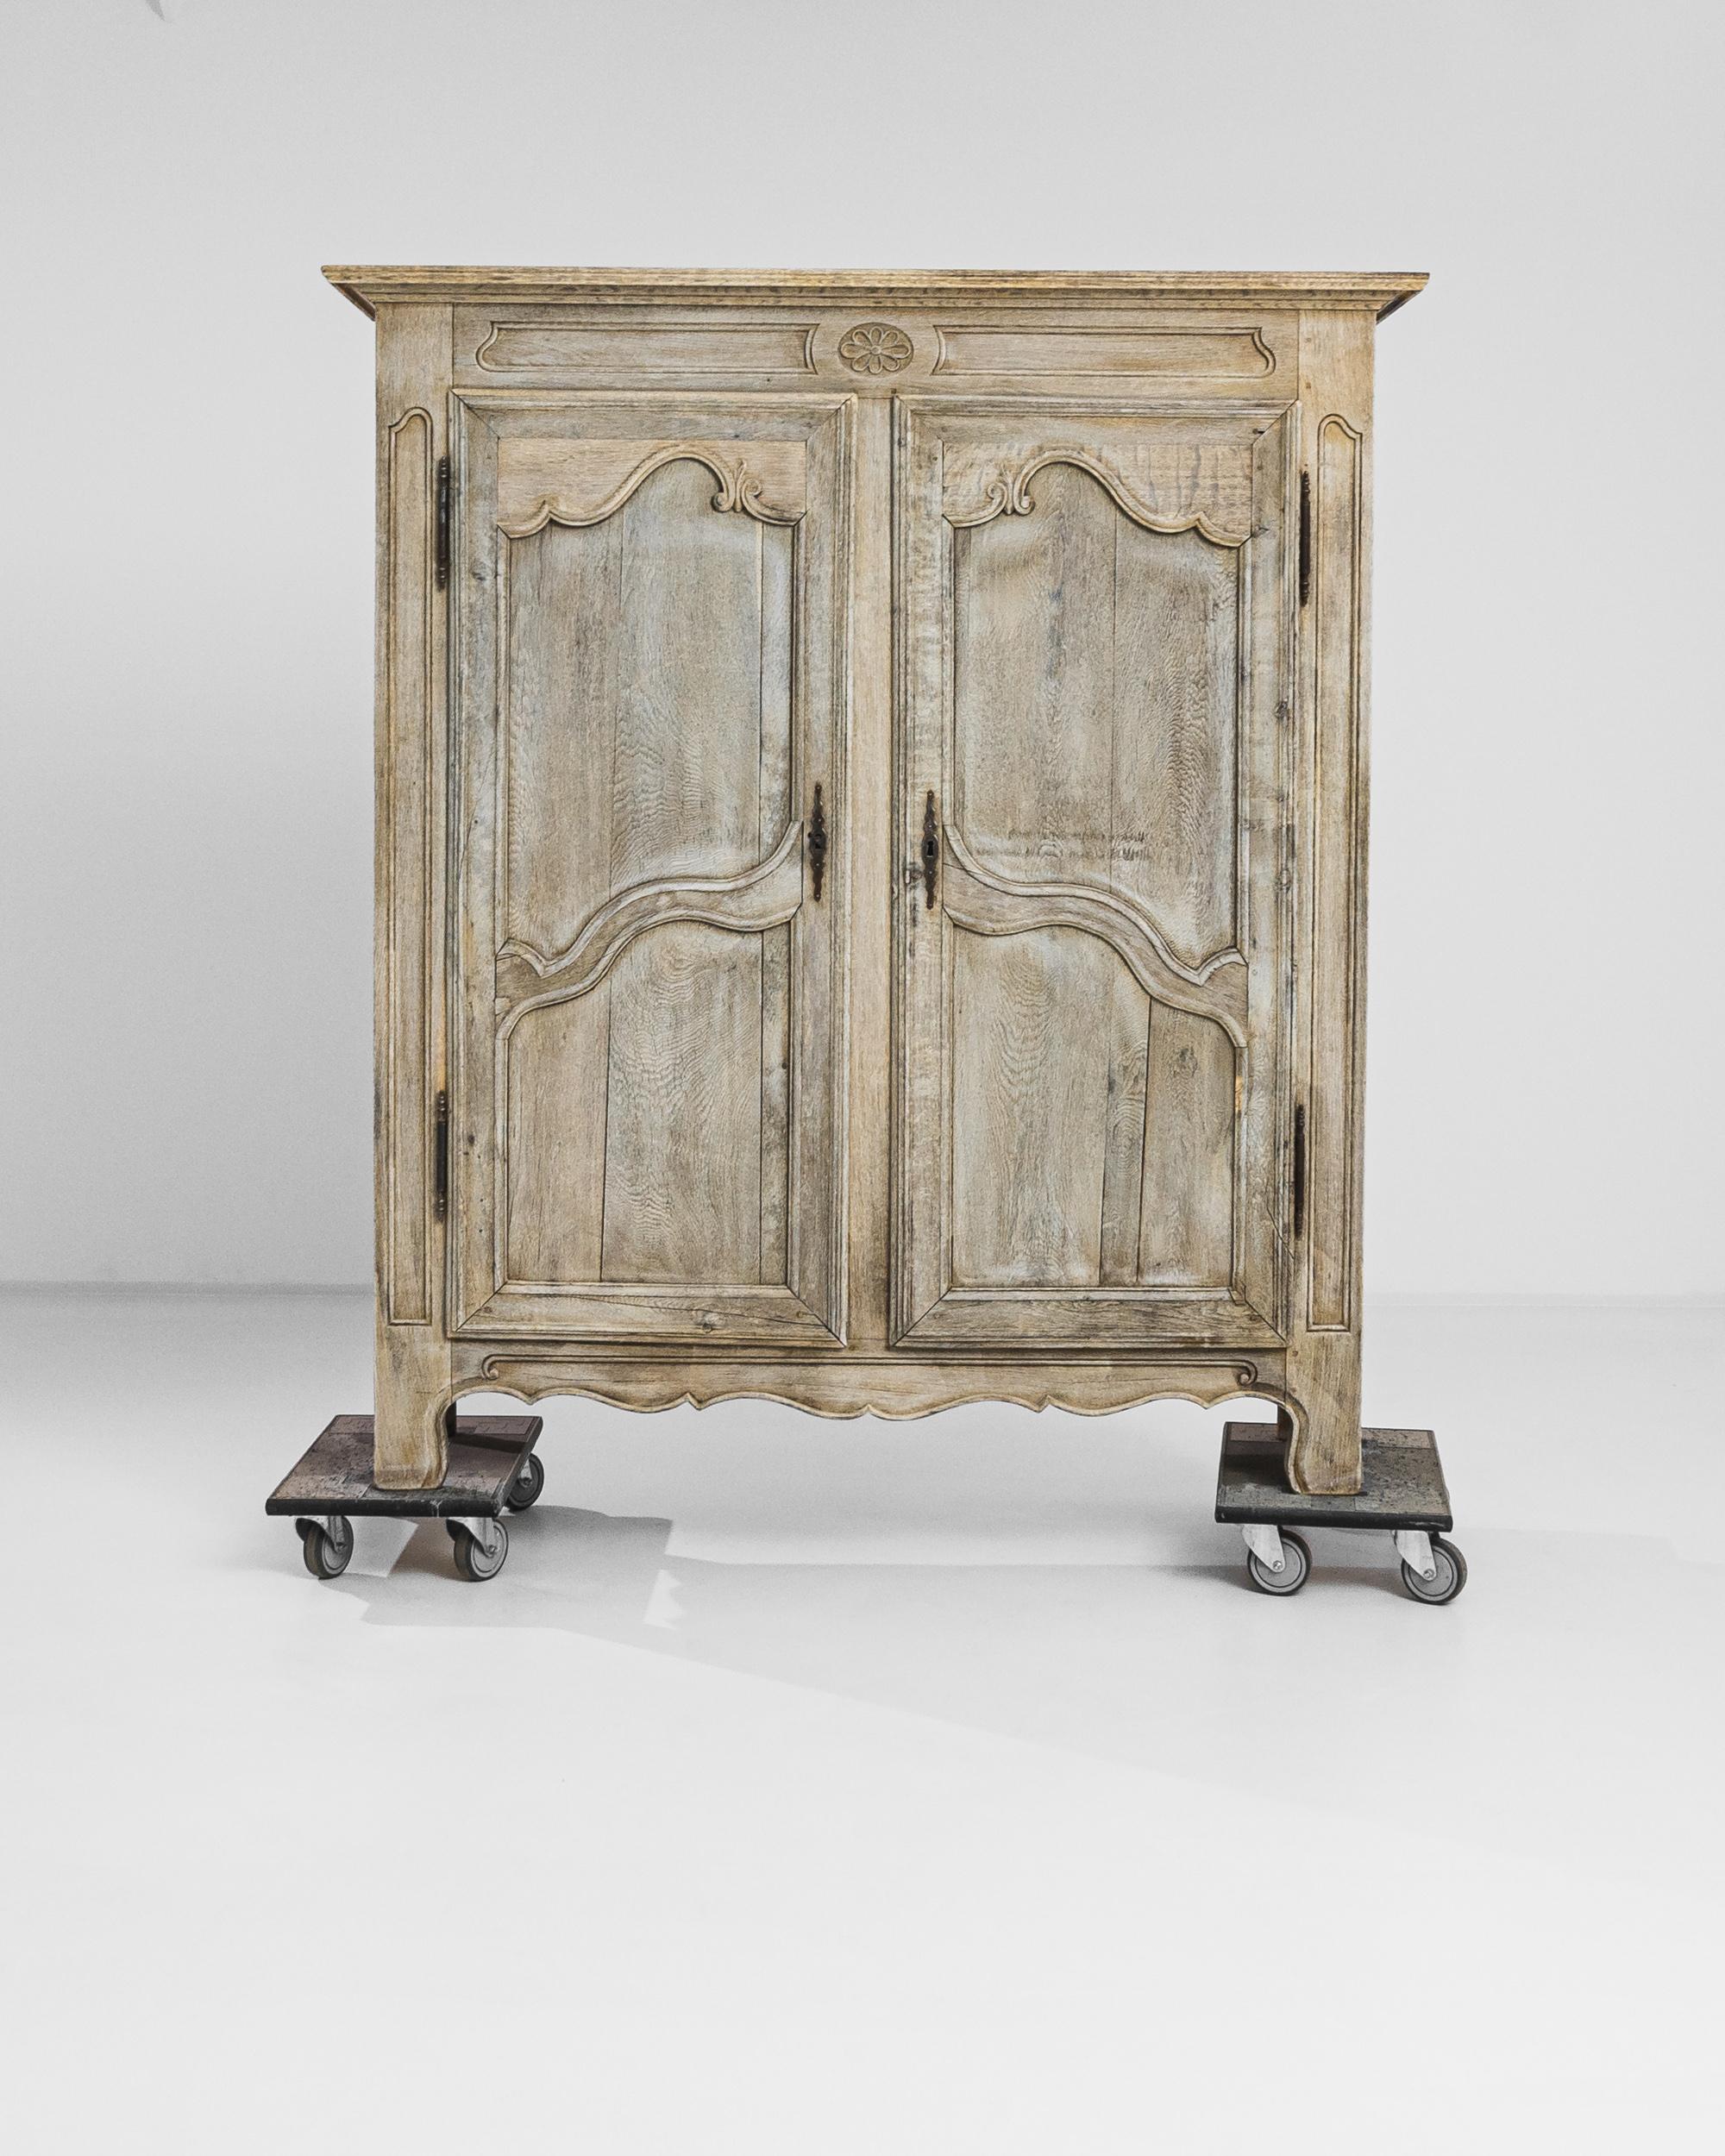 Transform your space with the timeless elegance of this 1820s French Bleached Oak Cabinet. Adorned with intricately carved designs on the doors and surrounding areas, this cabinet exudes sophistication and charm. Its scalloped apron adds a touch of